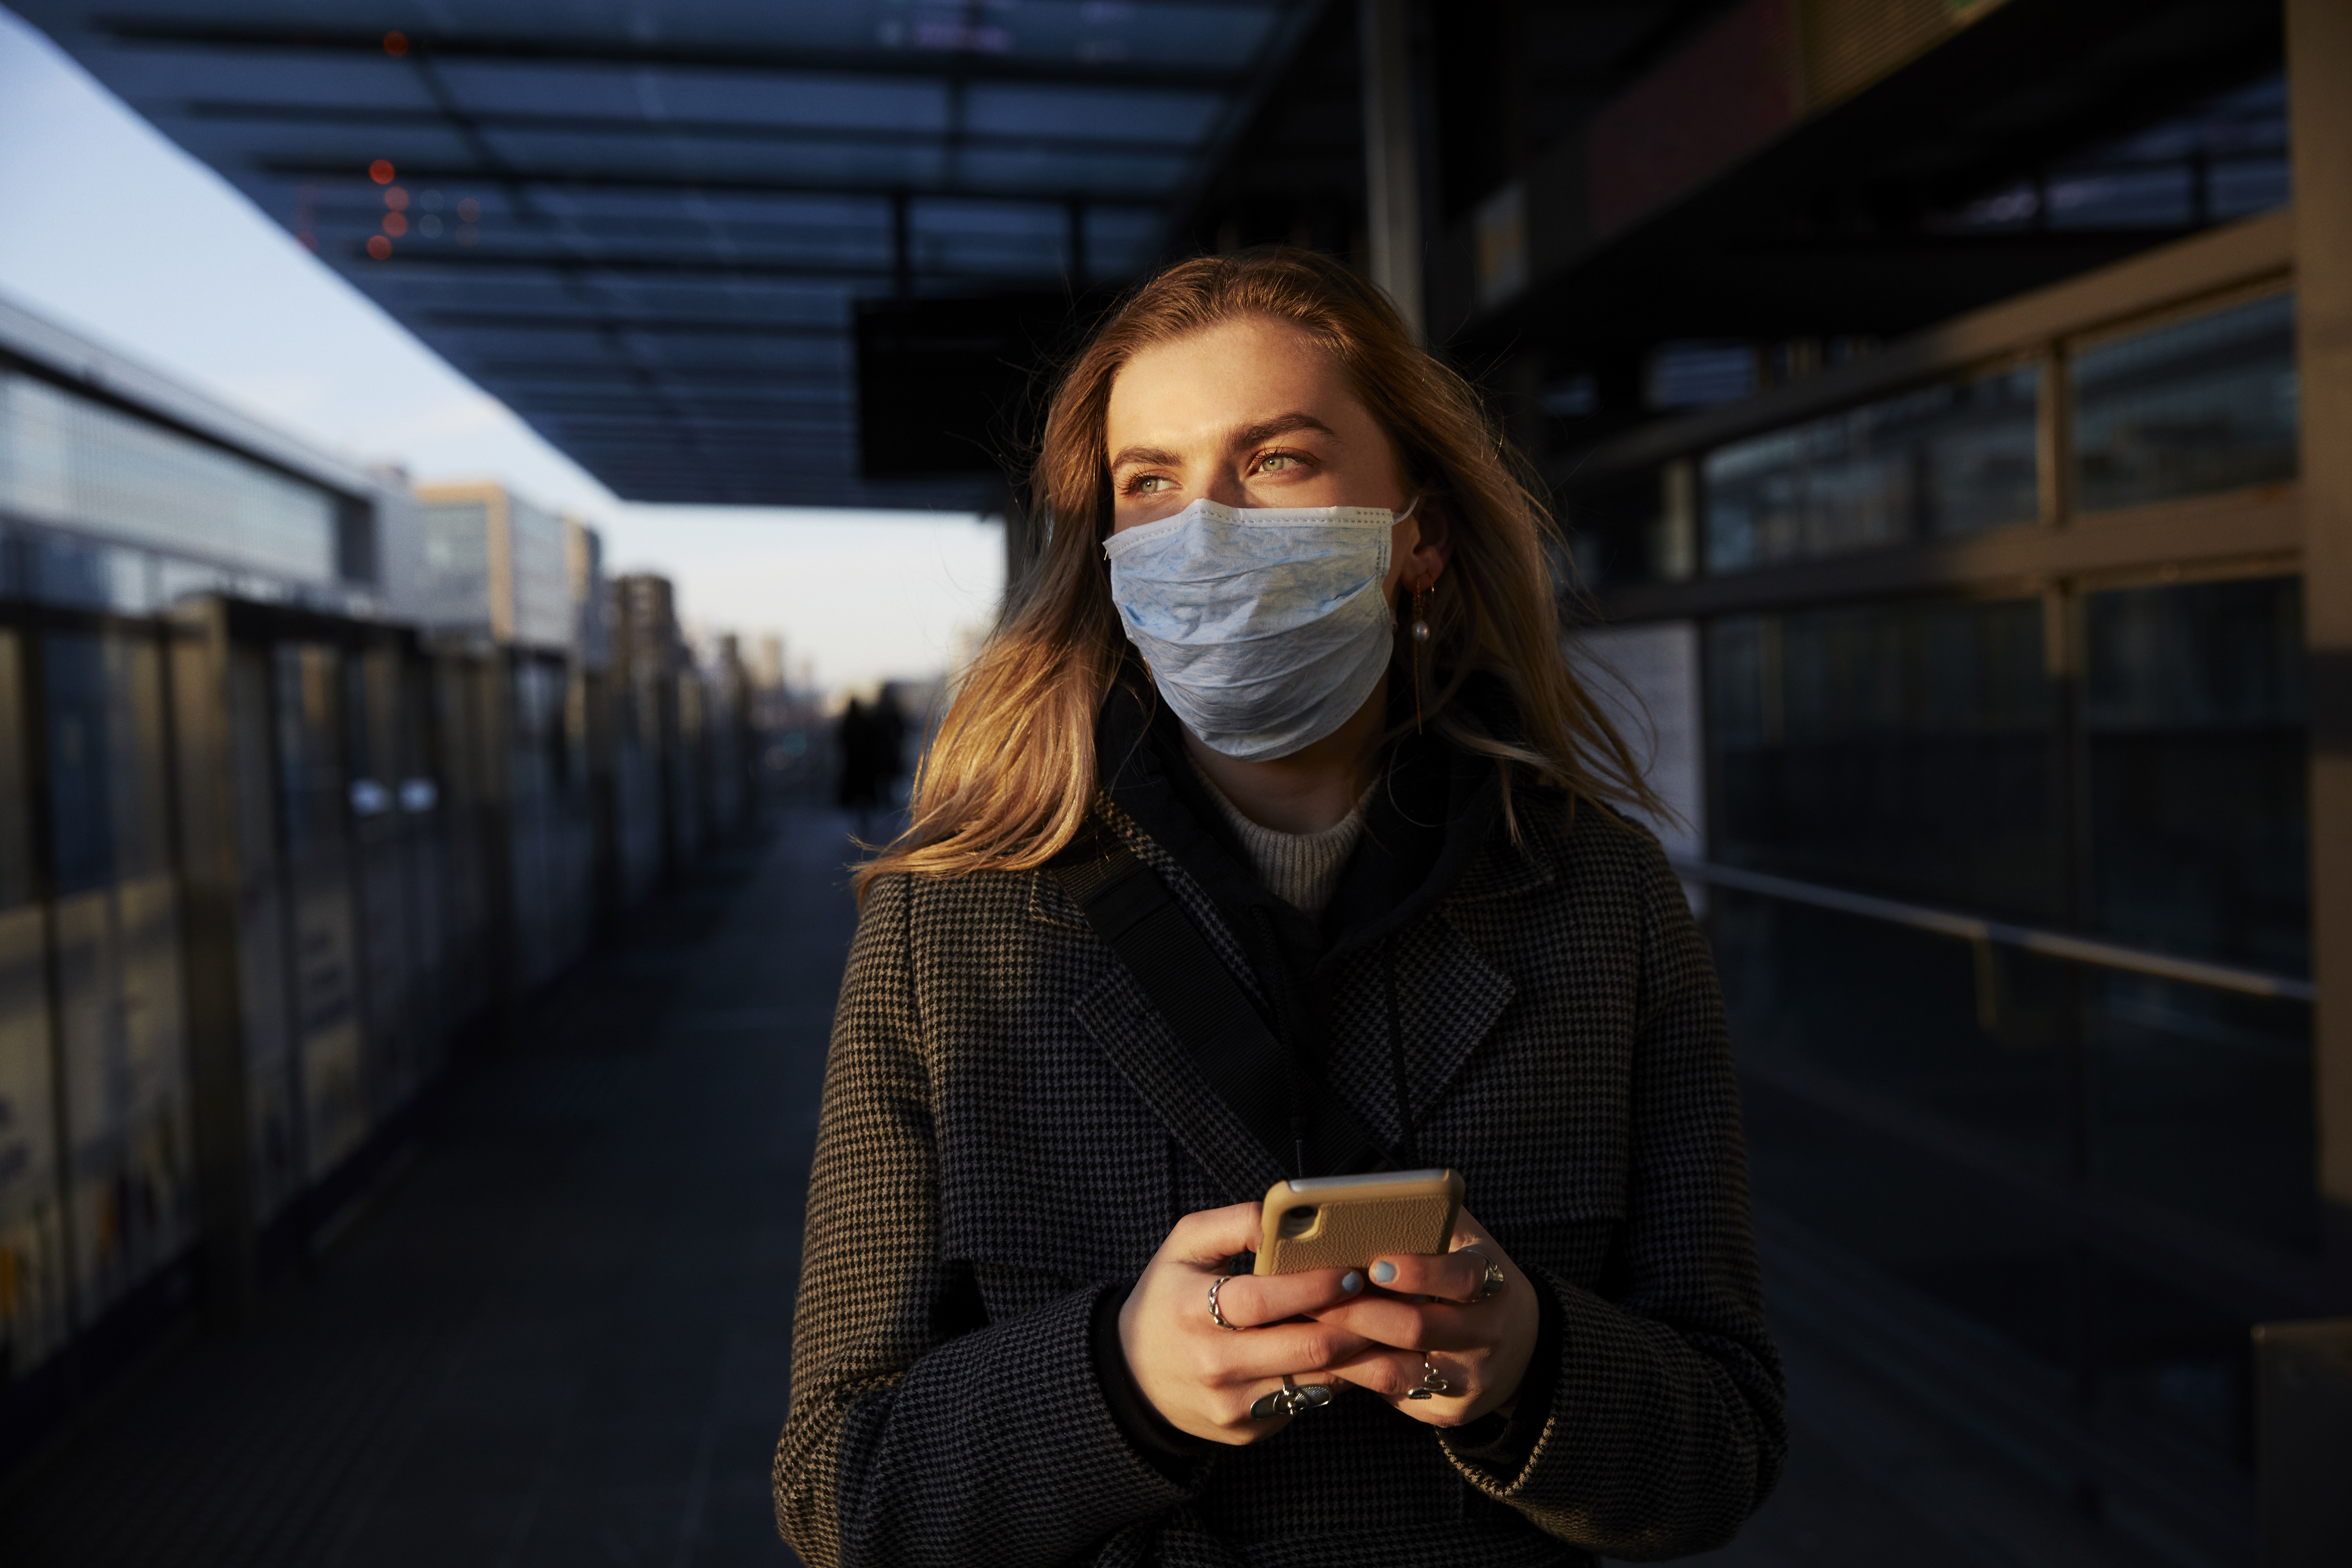 A person wearing a breathing mask holds a cellphone while standing on a city street.